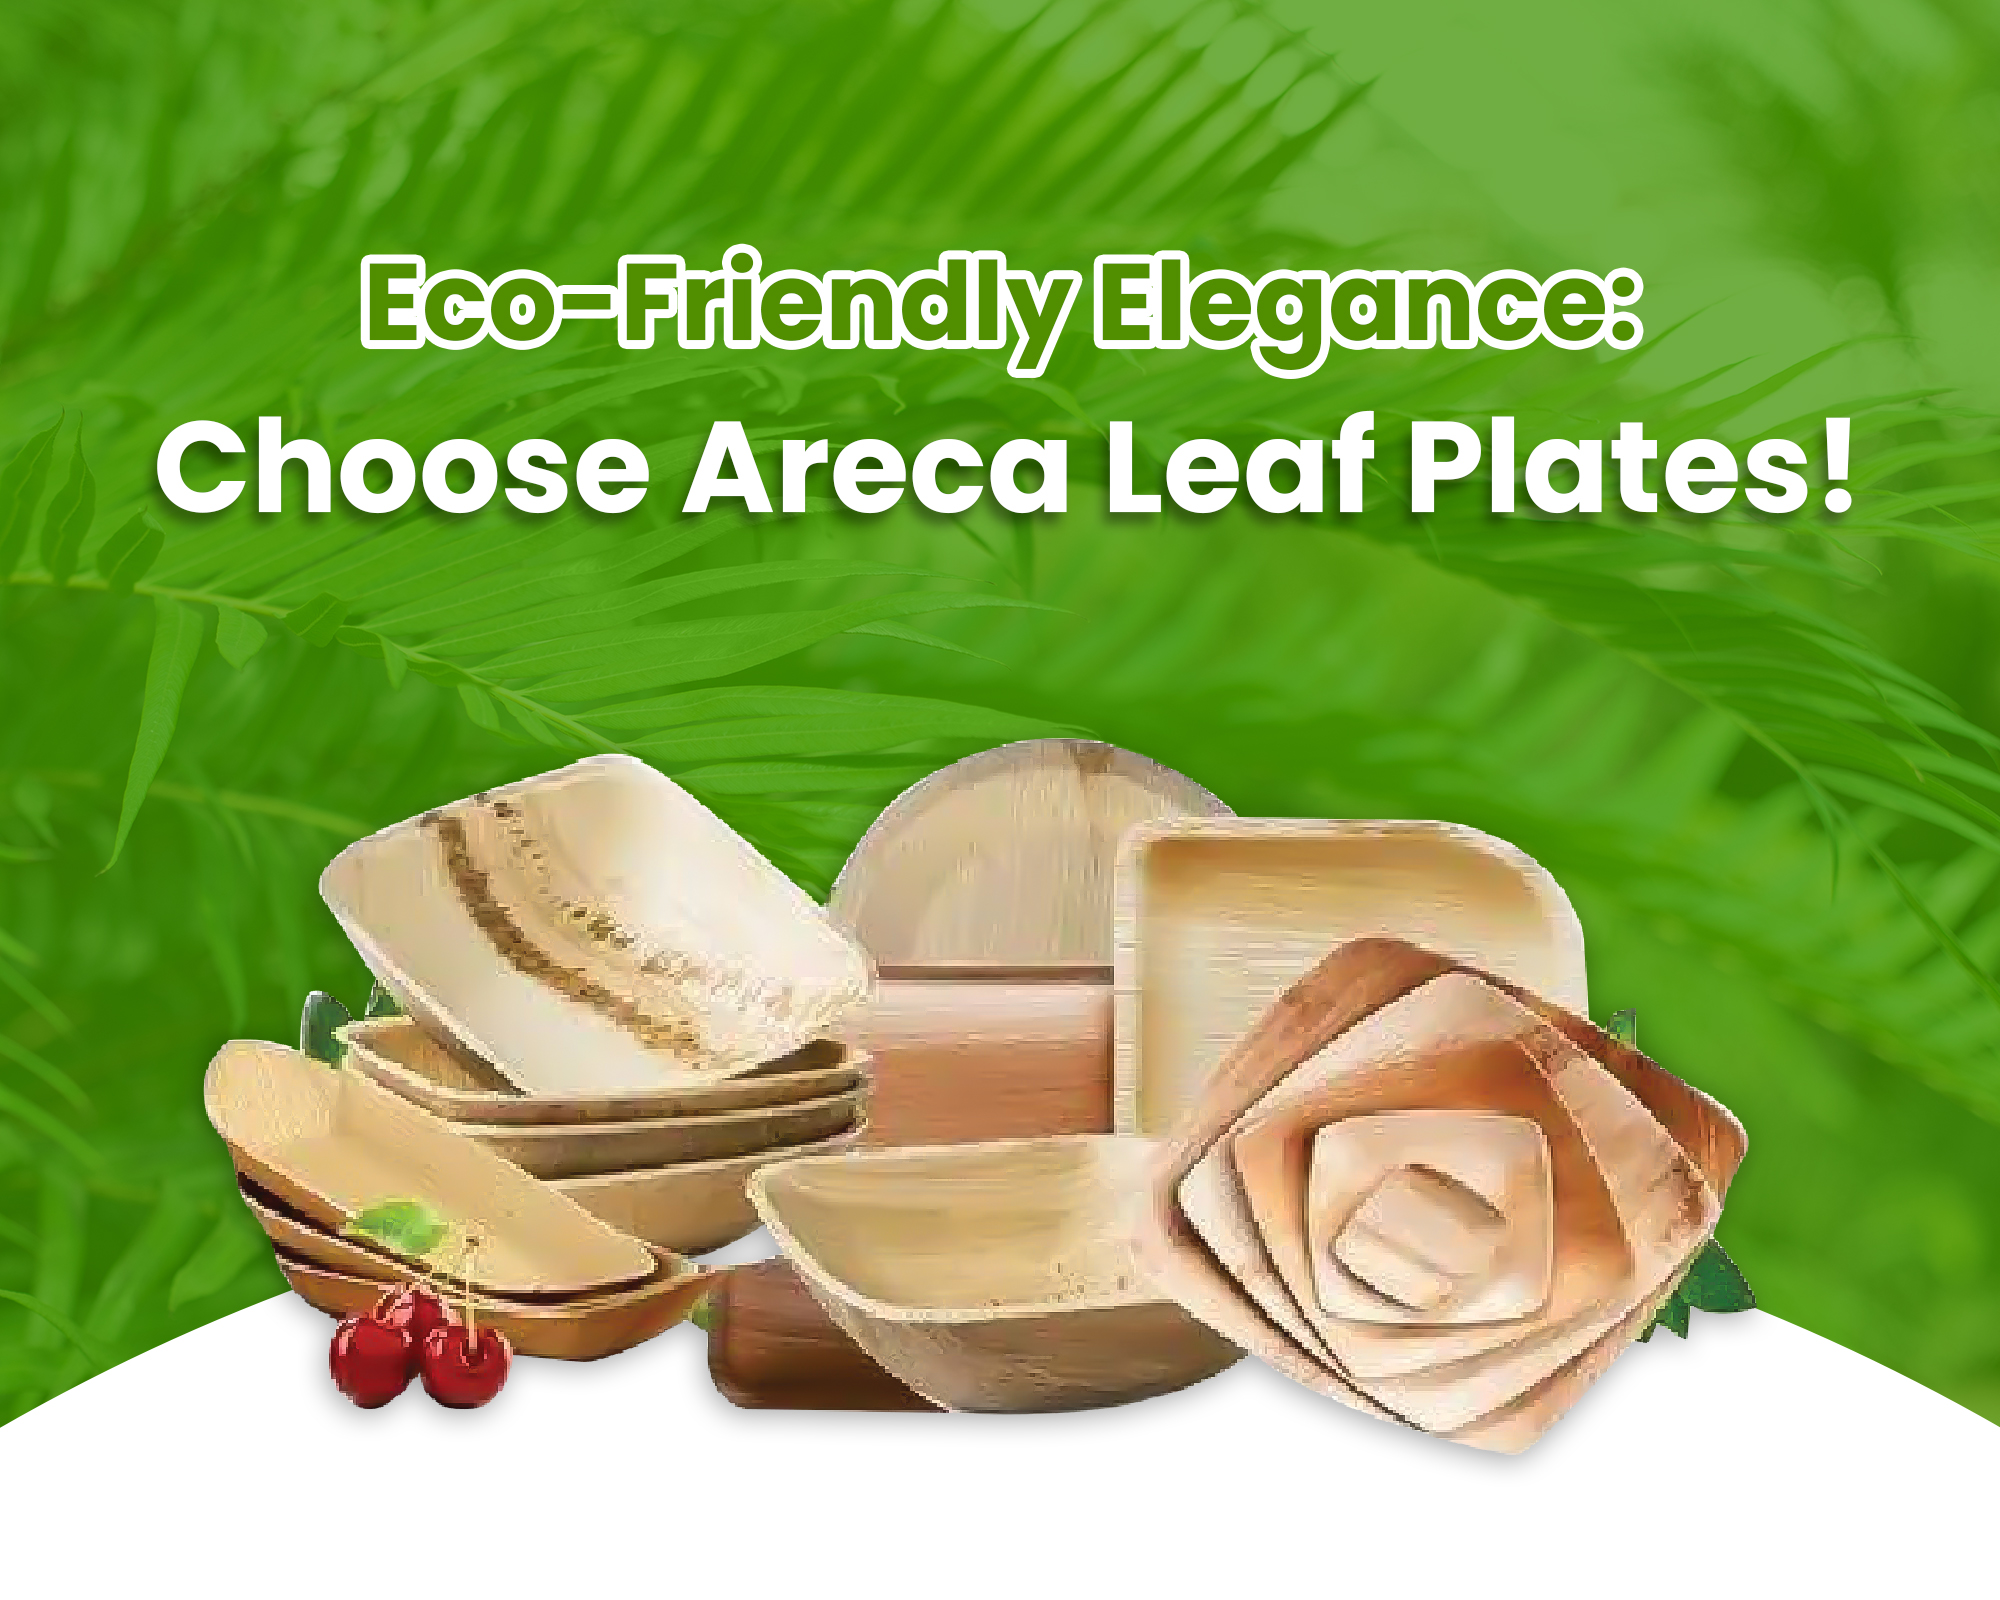 Green Dinnerware - Areca Palm Products for Eco-Friendly Dining